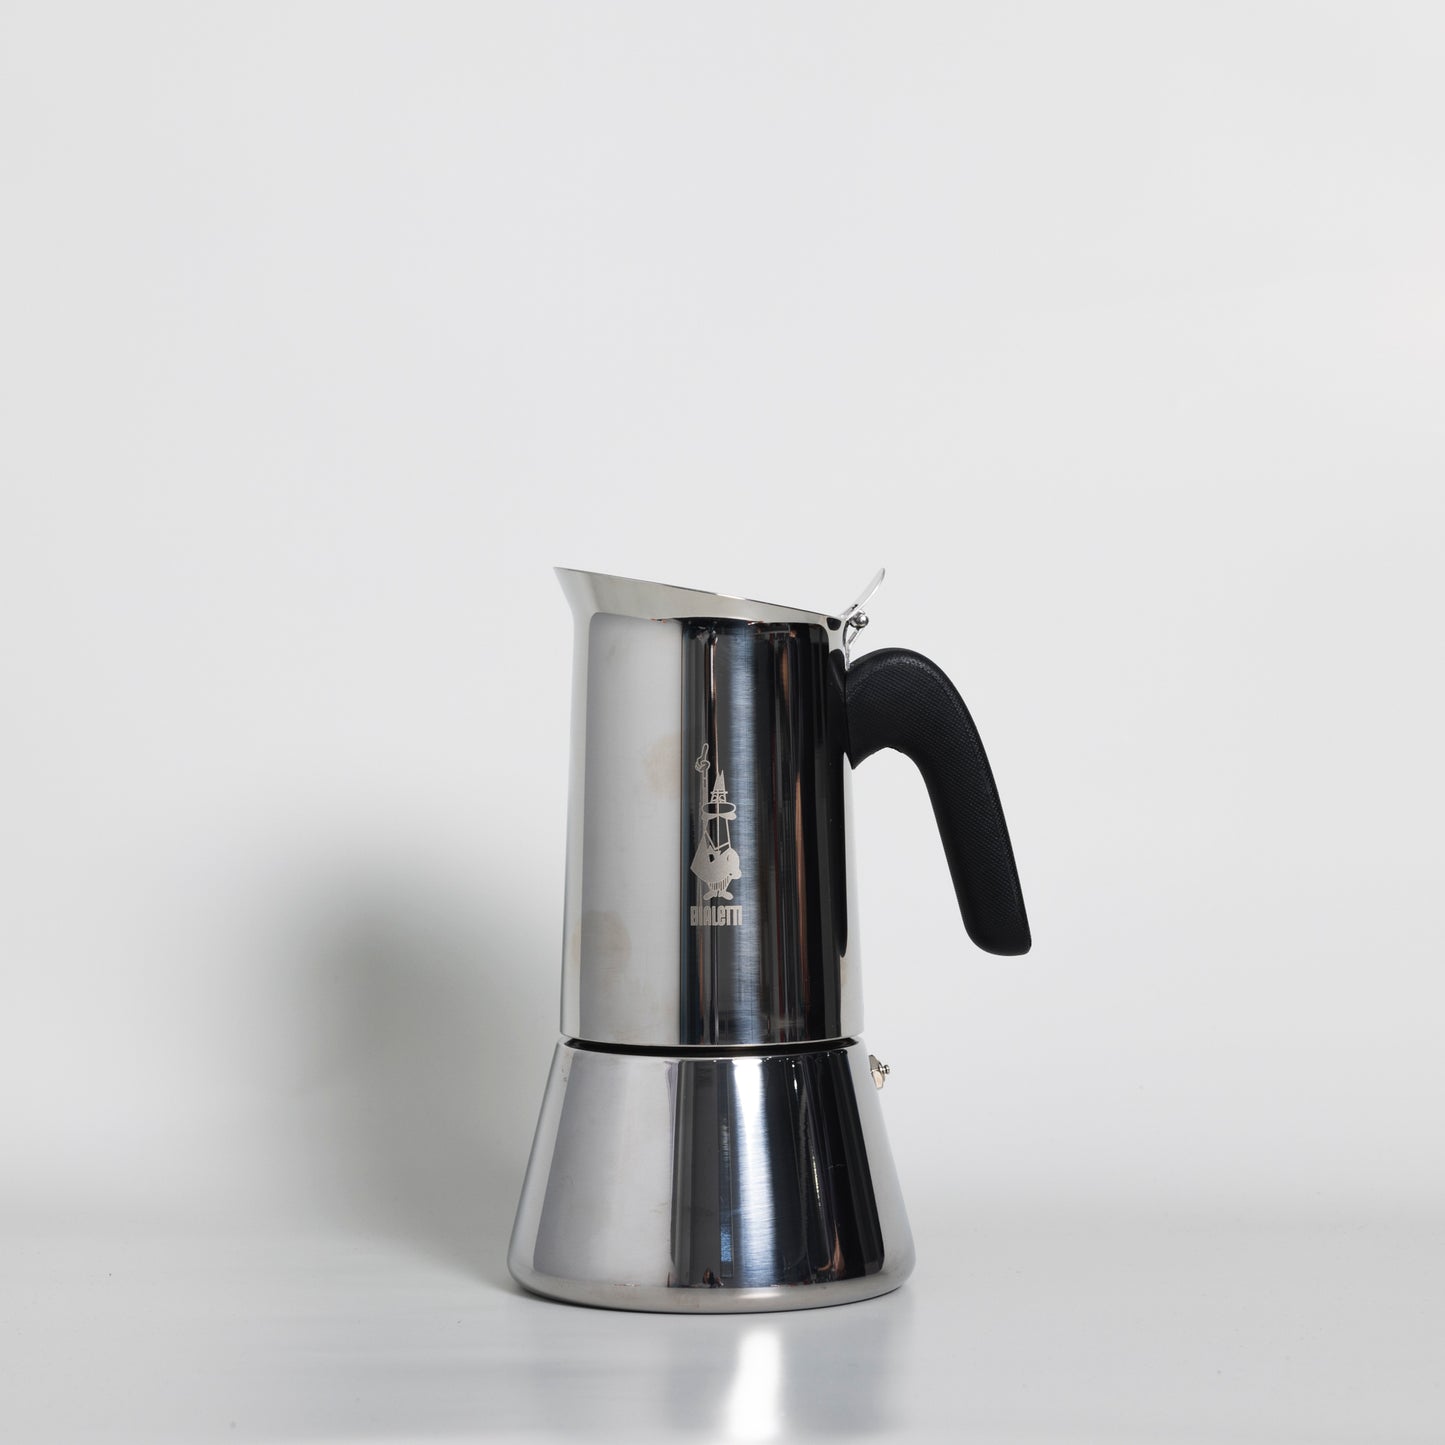 Bialetti Induction